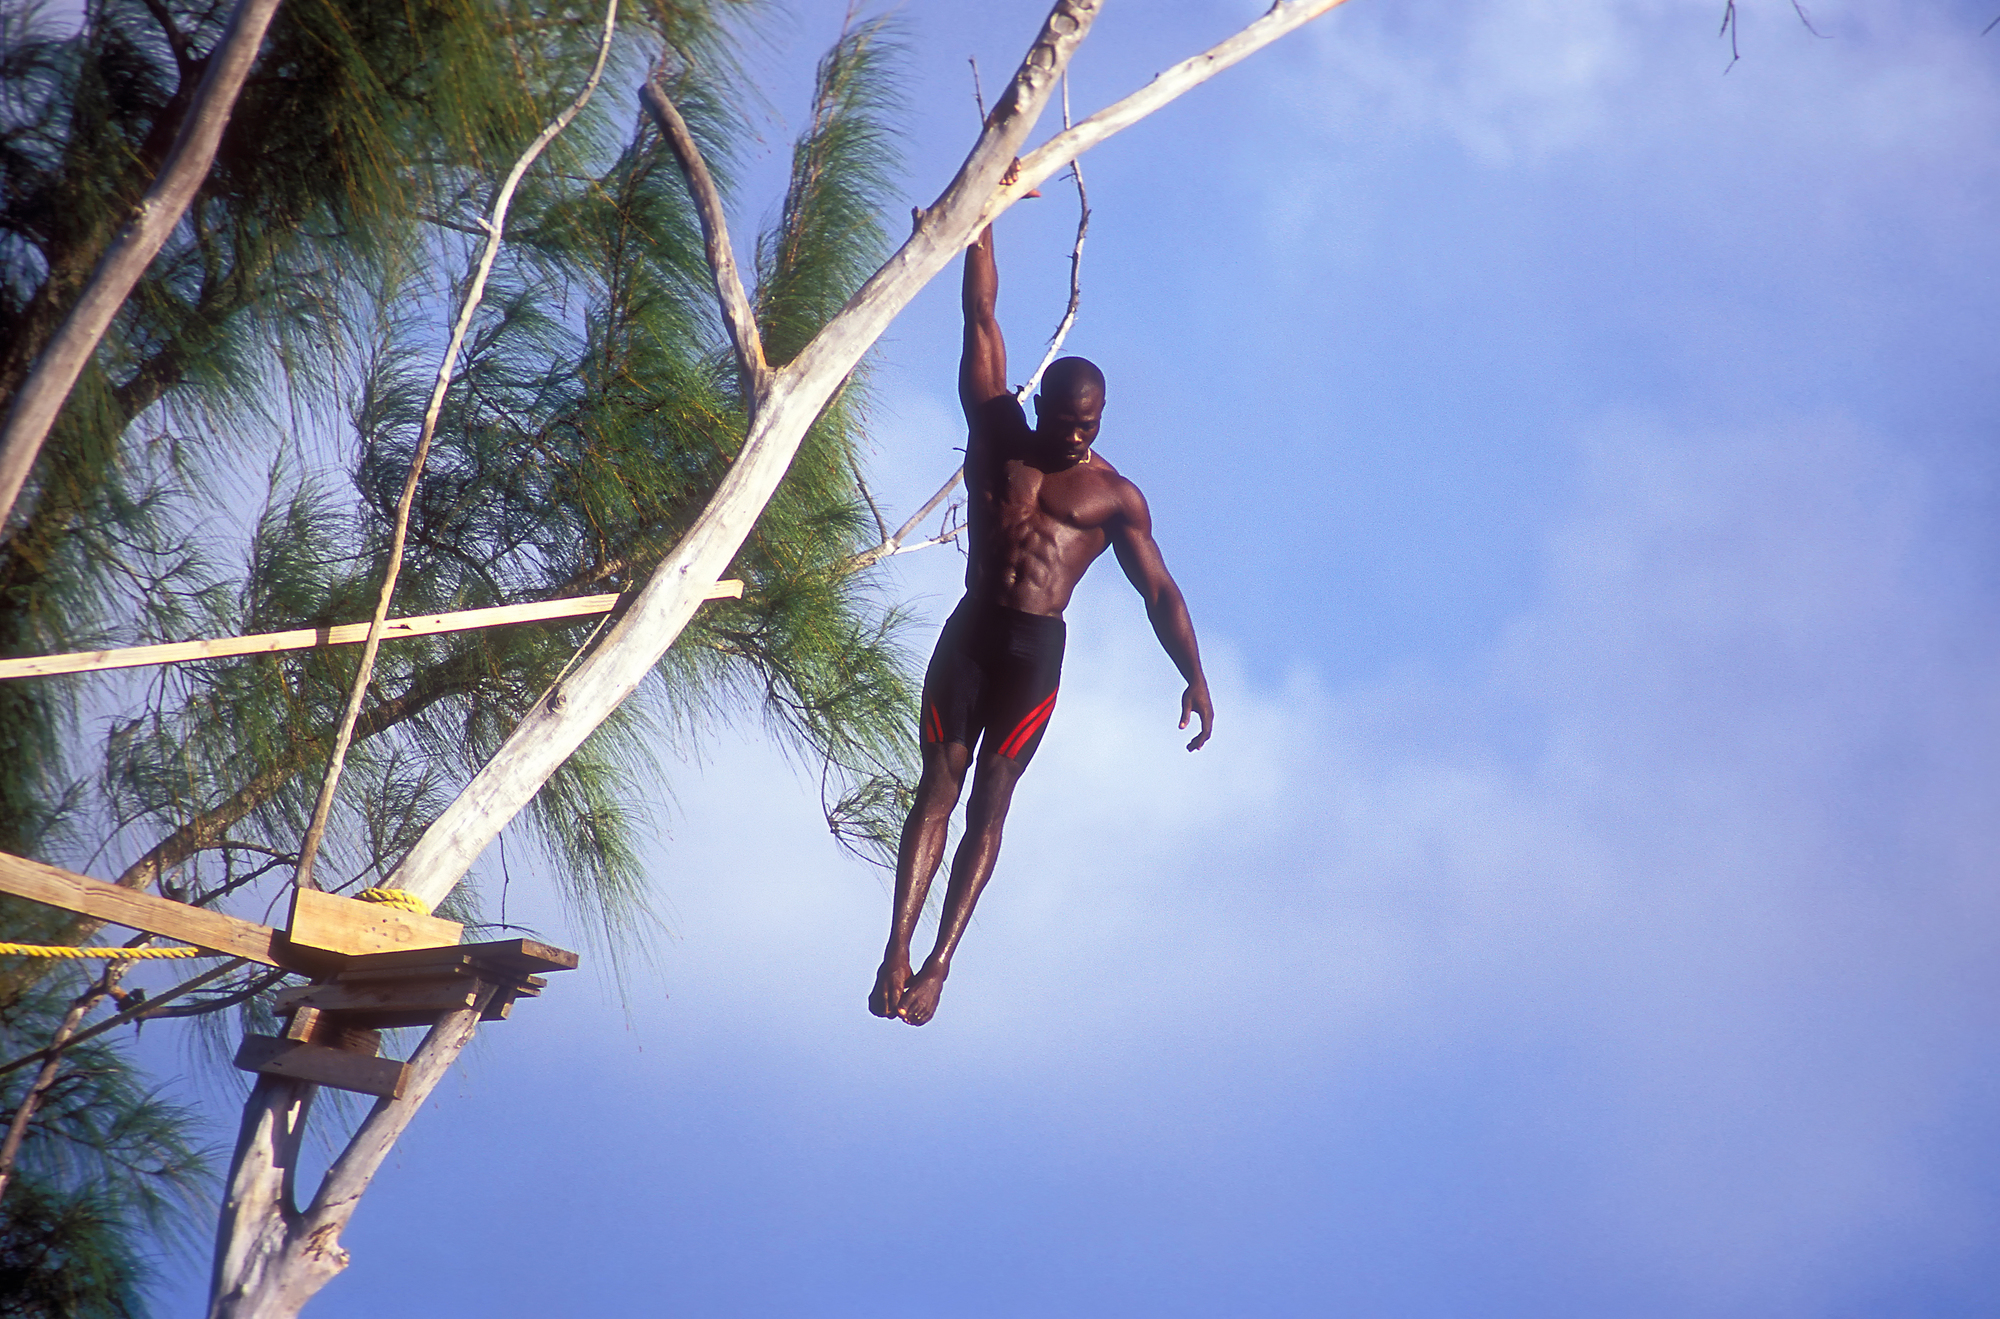 Negril - 'Cliff Jumping' Jamaica Pictures Jamaica in Global-Geogr...